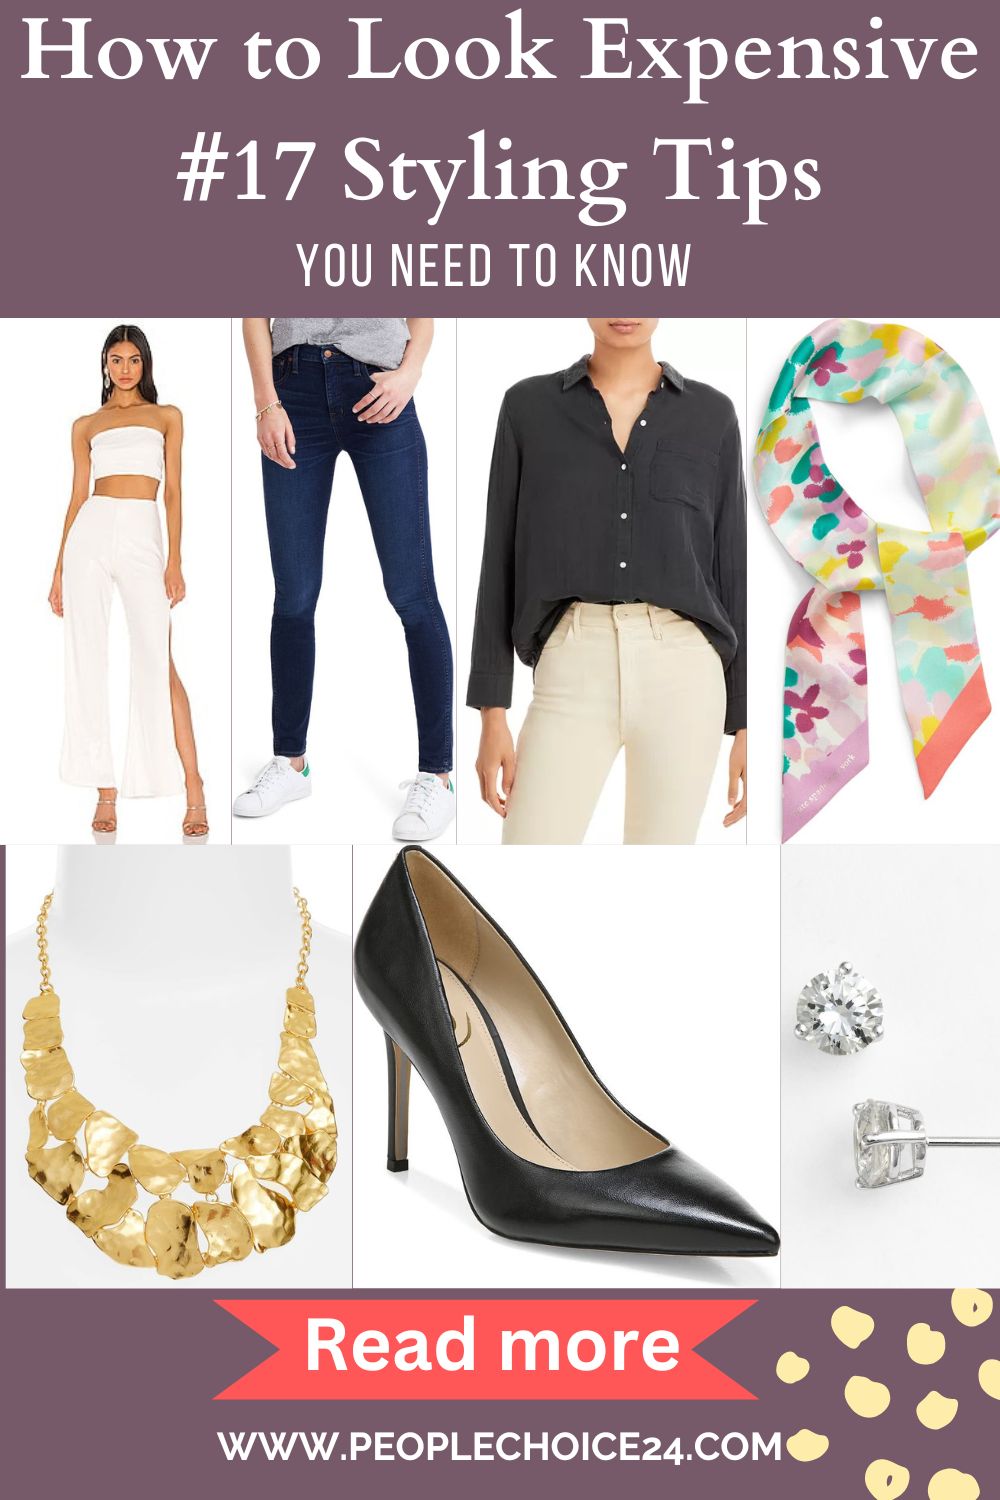 How to Look Expensive? 17 Styling Tips with Bonus